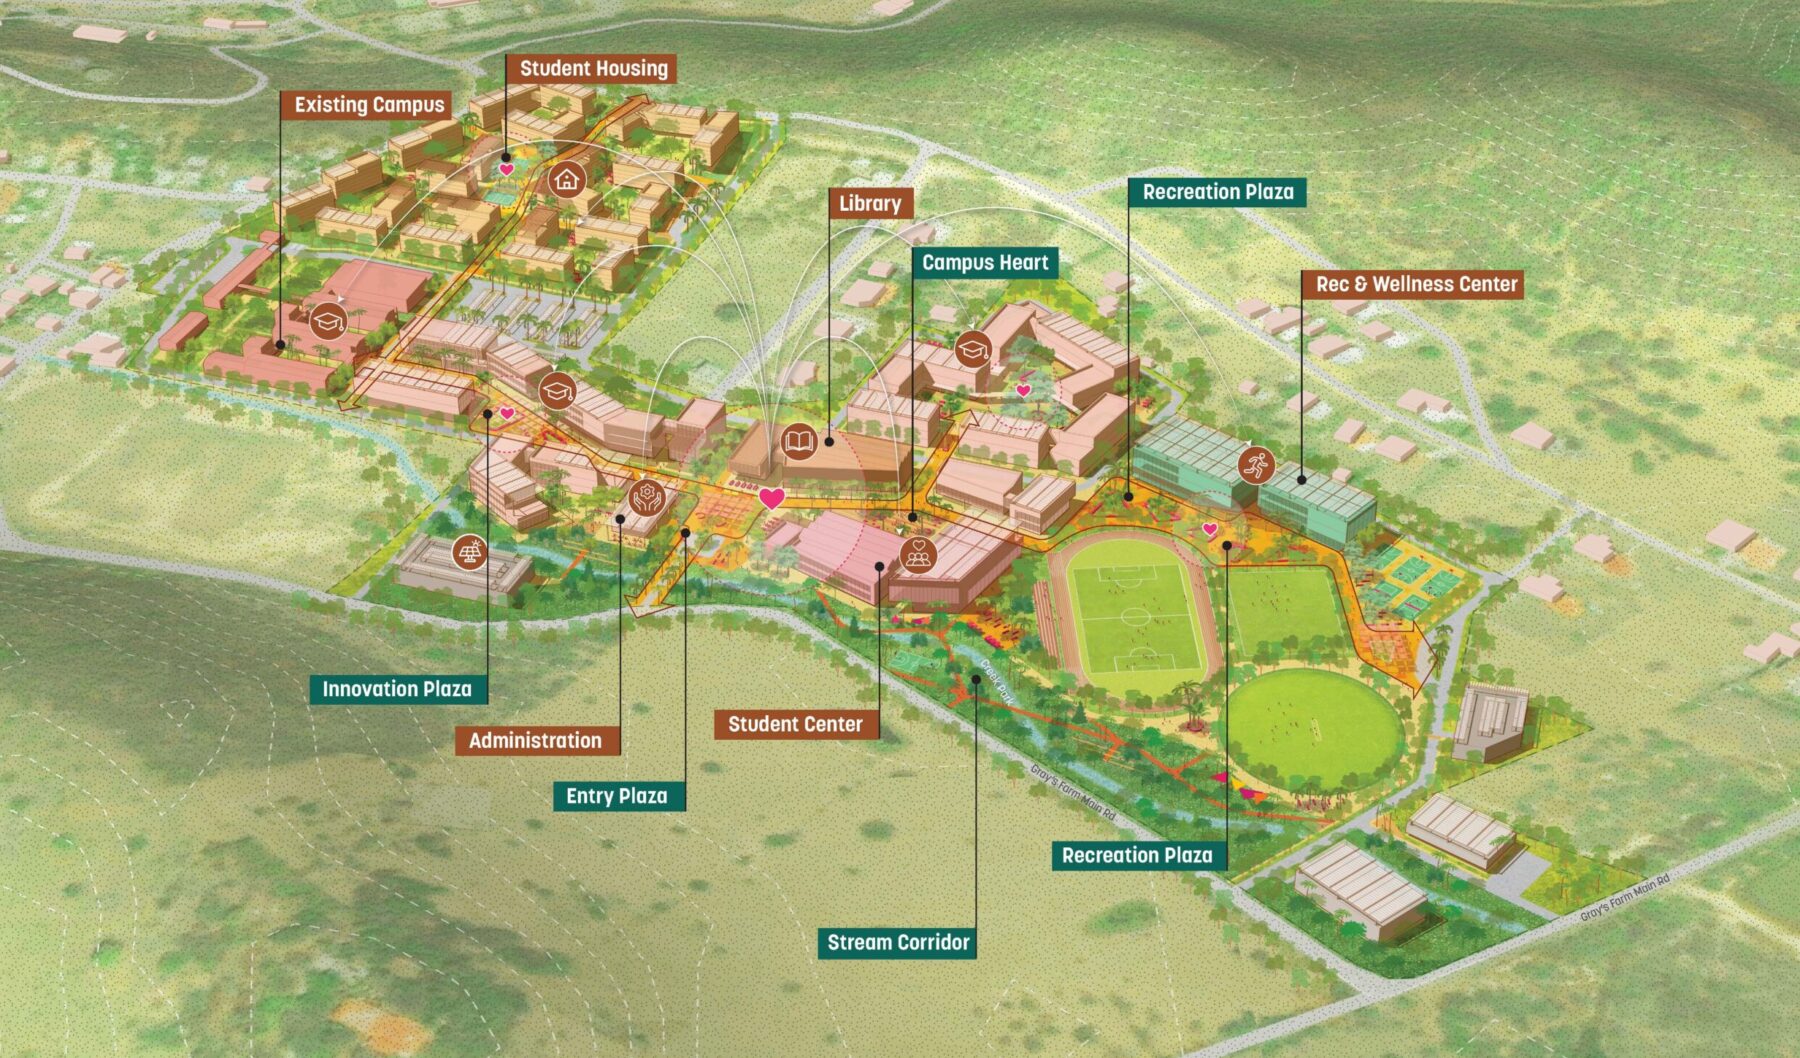 Aerial view of a campus map with labels for all the facilities